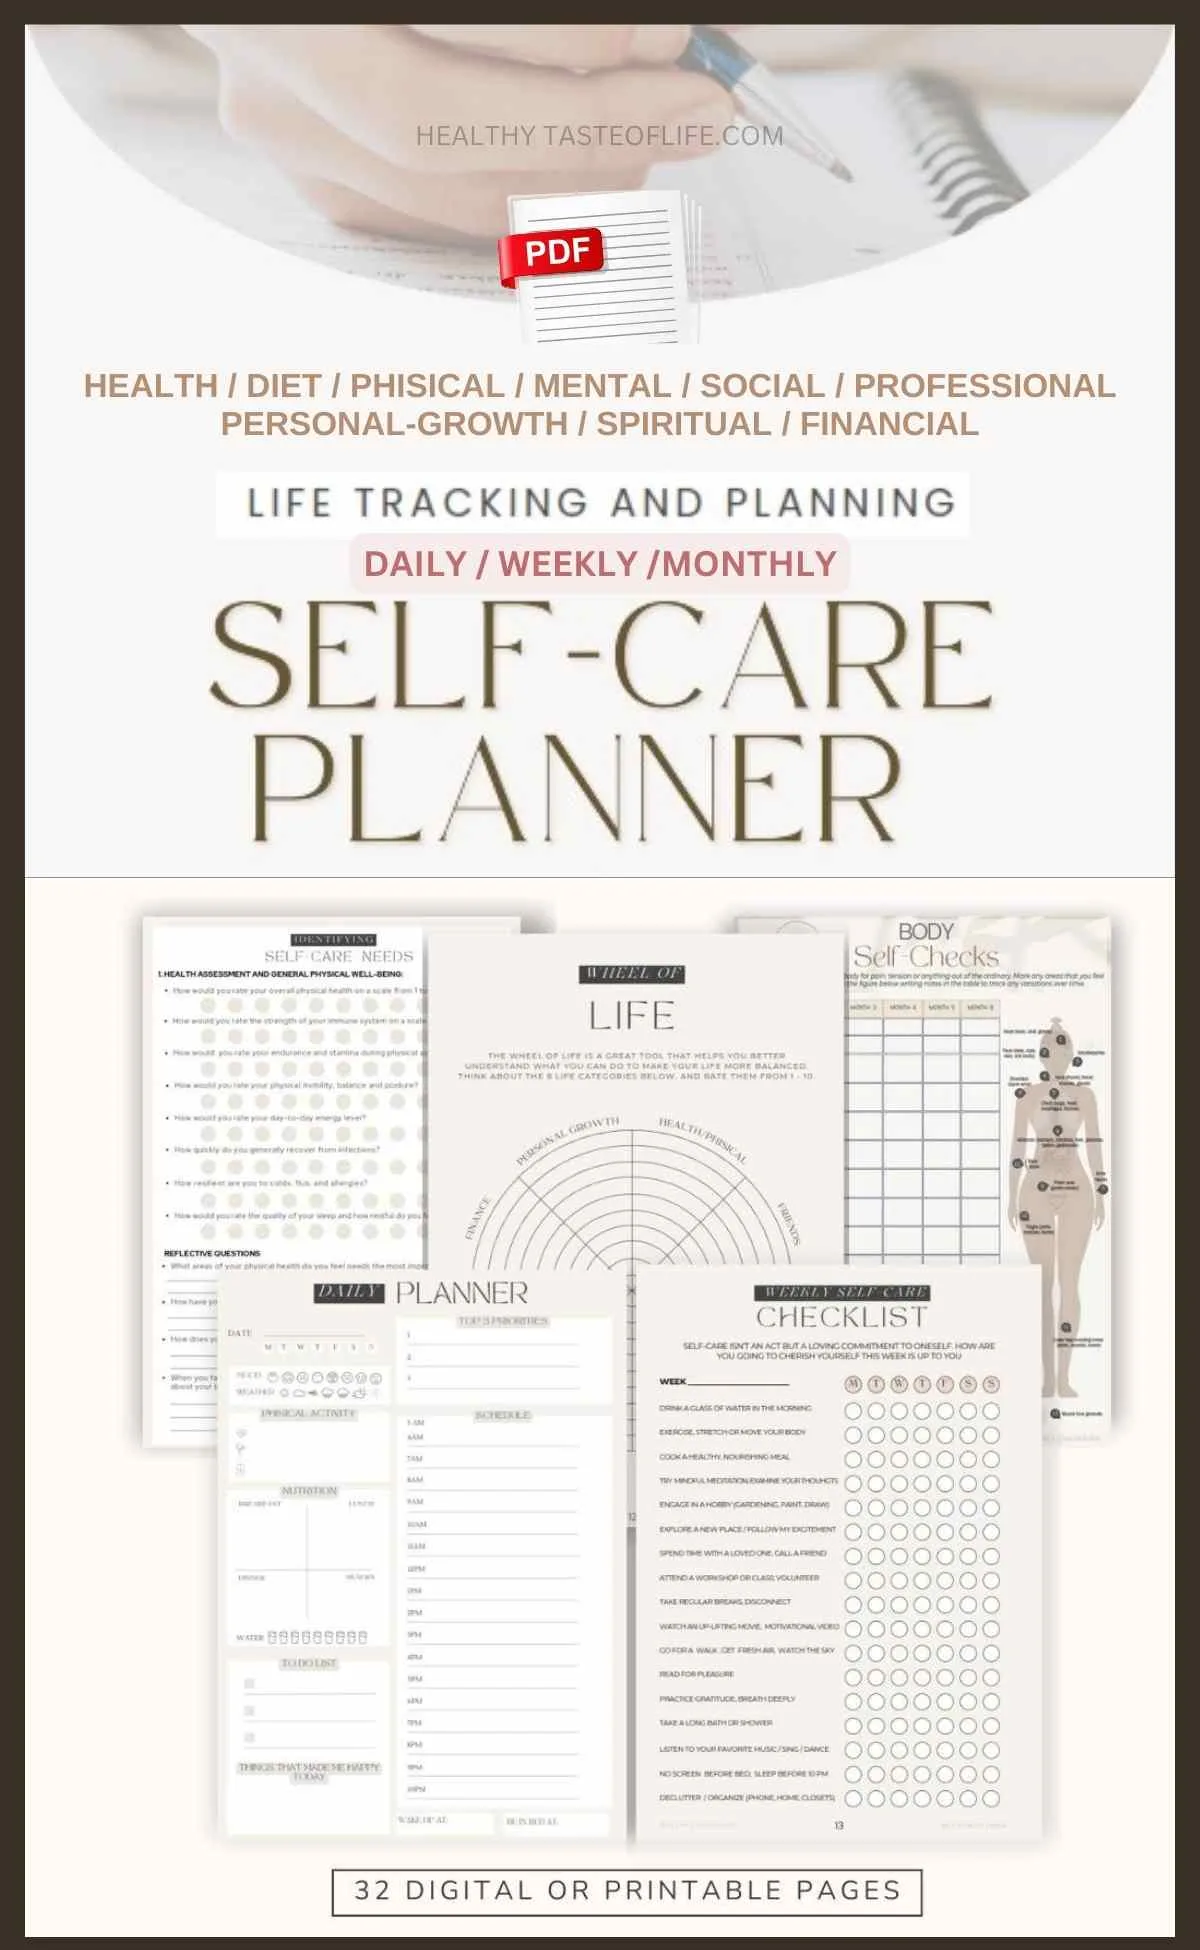 PDF Self-care planner (32 pages total) - instant download. This planner can be printed, or used as a digital self-care planner - in a note taking app. This self-care life planner (it's more like an all-in one journal) includes a holistic approach, covering physical, mental, emotional, personal development, spiritual, professional, financial and social goal setting and tracking. Includes checklists with self-care activities, planners, reflective questions, tracking tables, and detailed self-care review / overview on daily, weekly and monthly basis. 